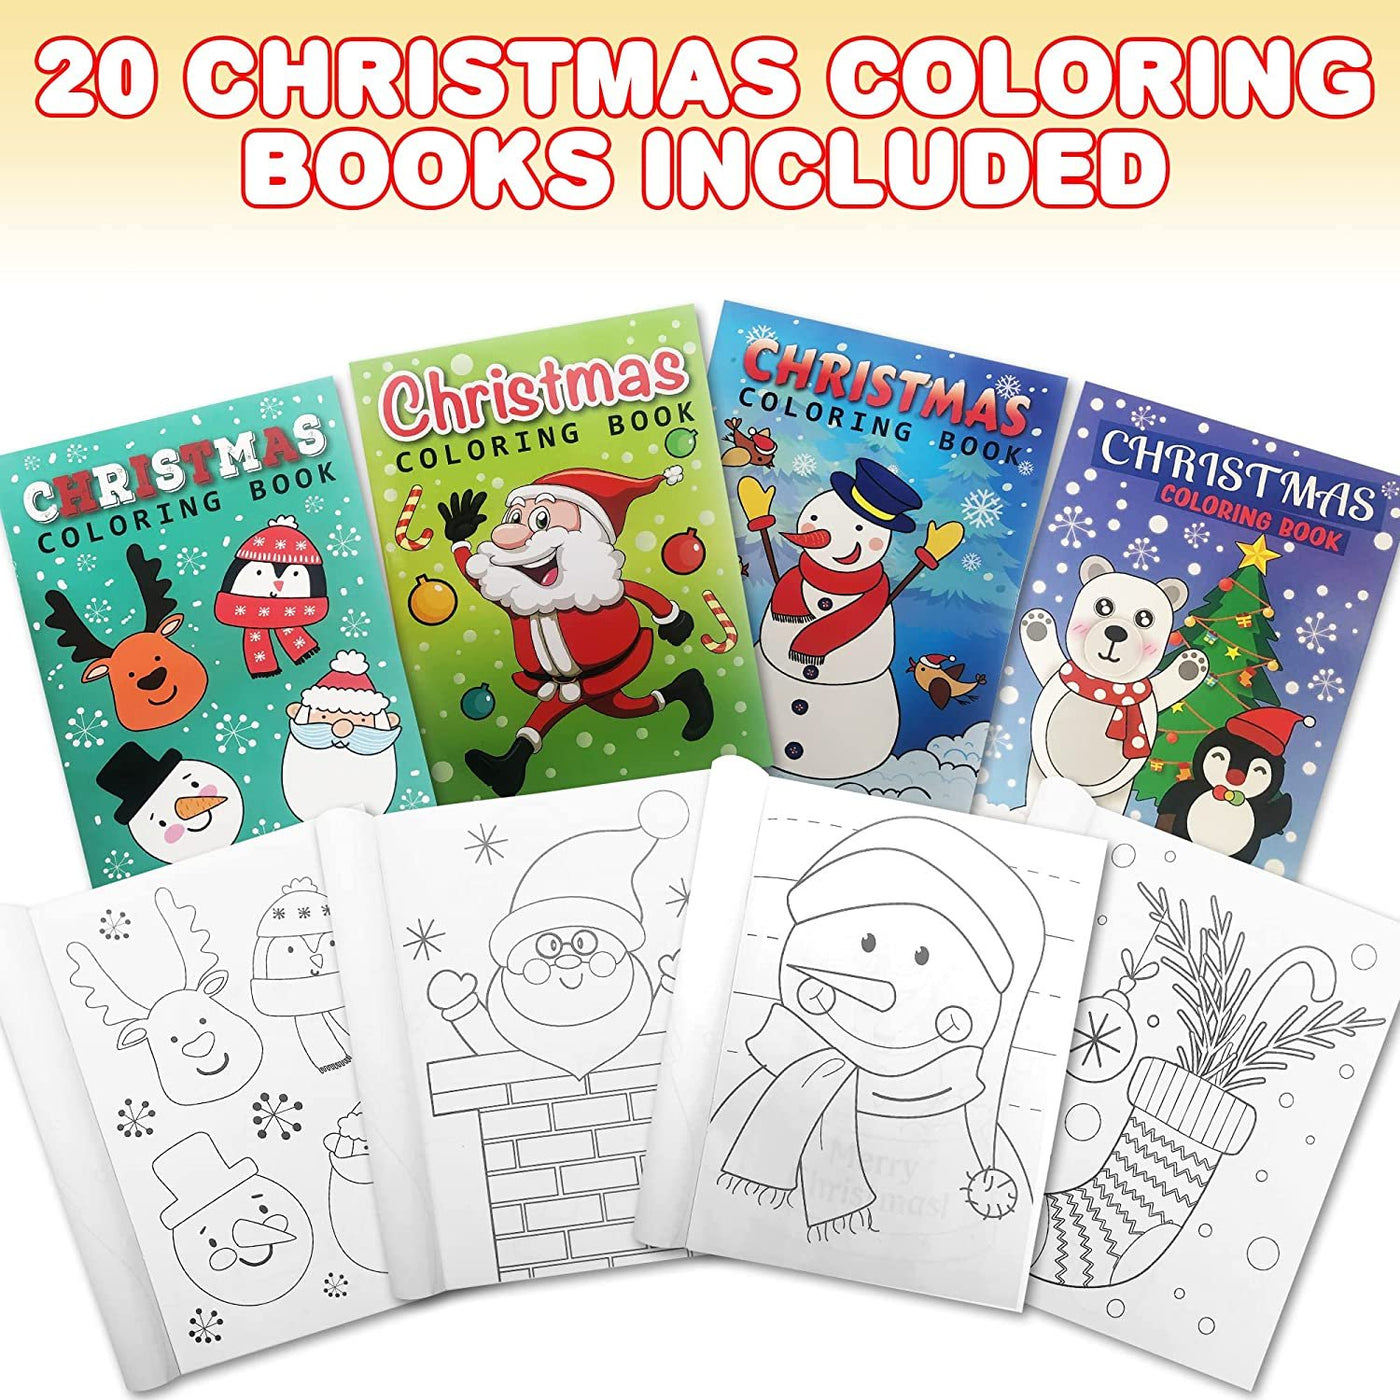 Christmas Books For Kids: coloring books for boys and girls with